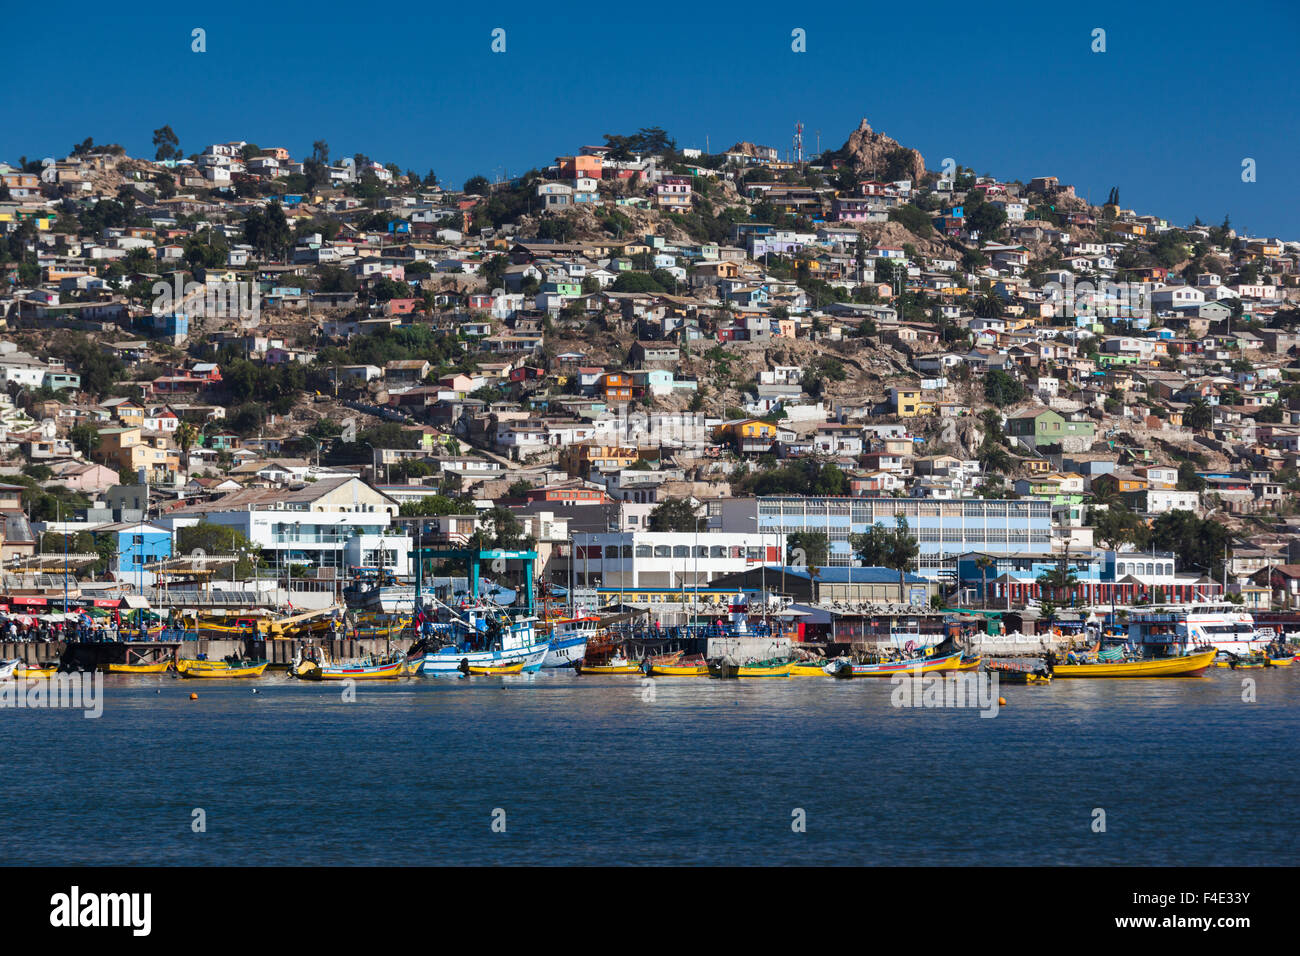 Chile, Coquimbo, city view from the waterfront. Stock Photo